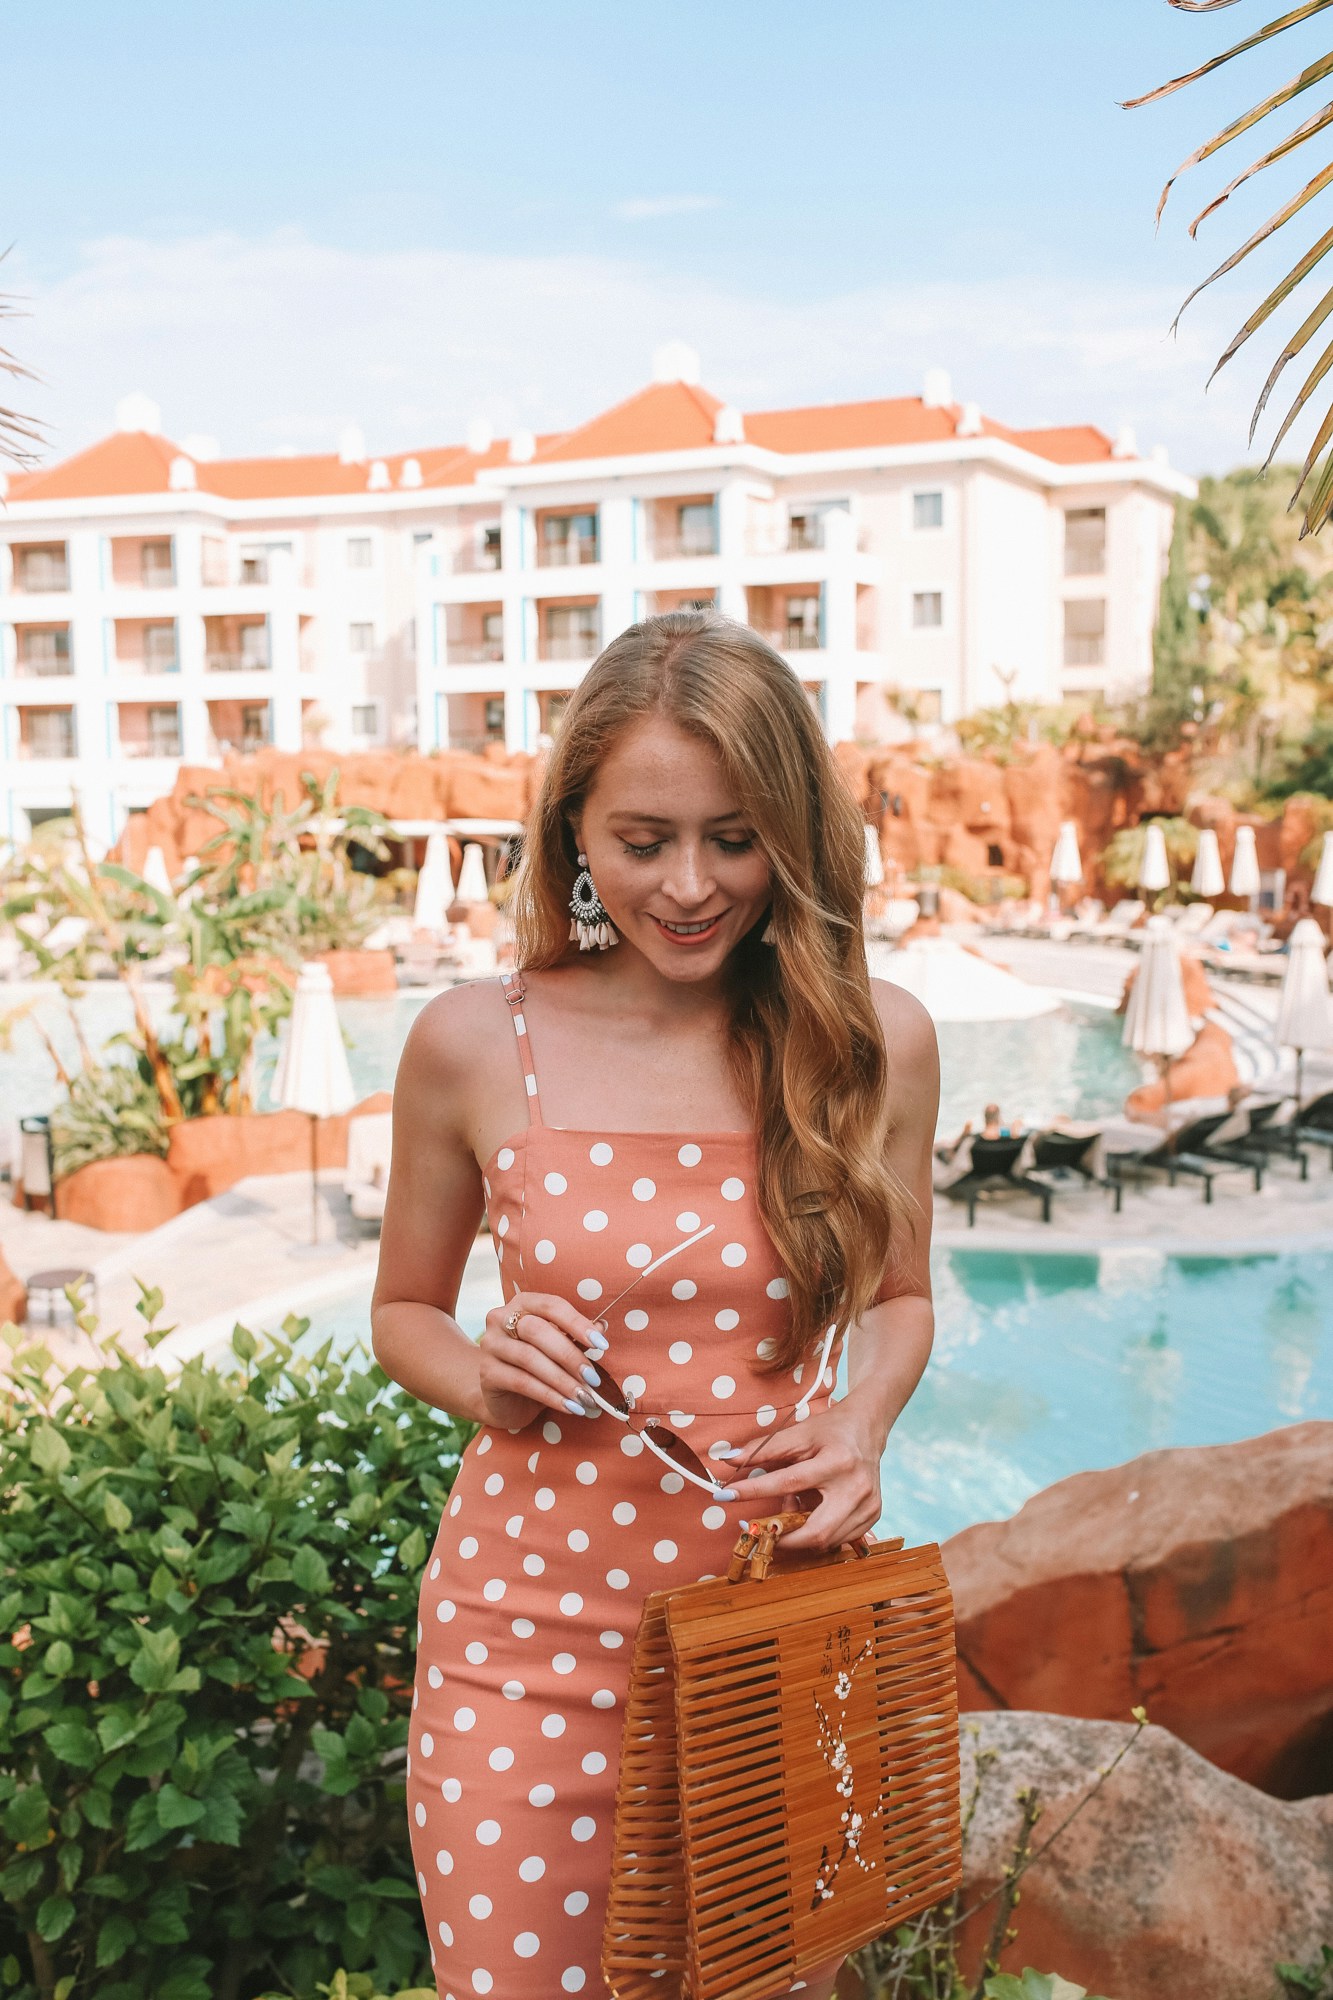 On my Portugal vacation I wore a polka dot dress from Forever 21, Baublebar earrings, a vintage Japanese picnic bag and white cat eye sunglasses from Mango